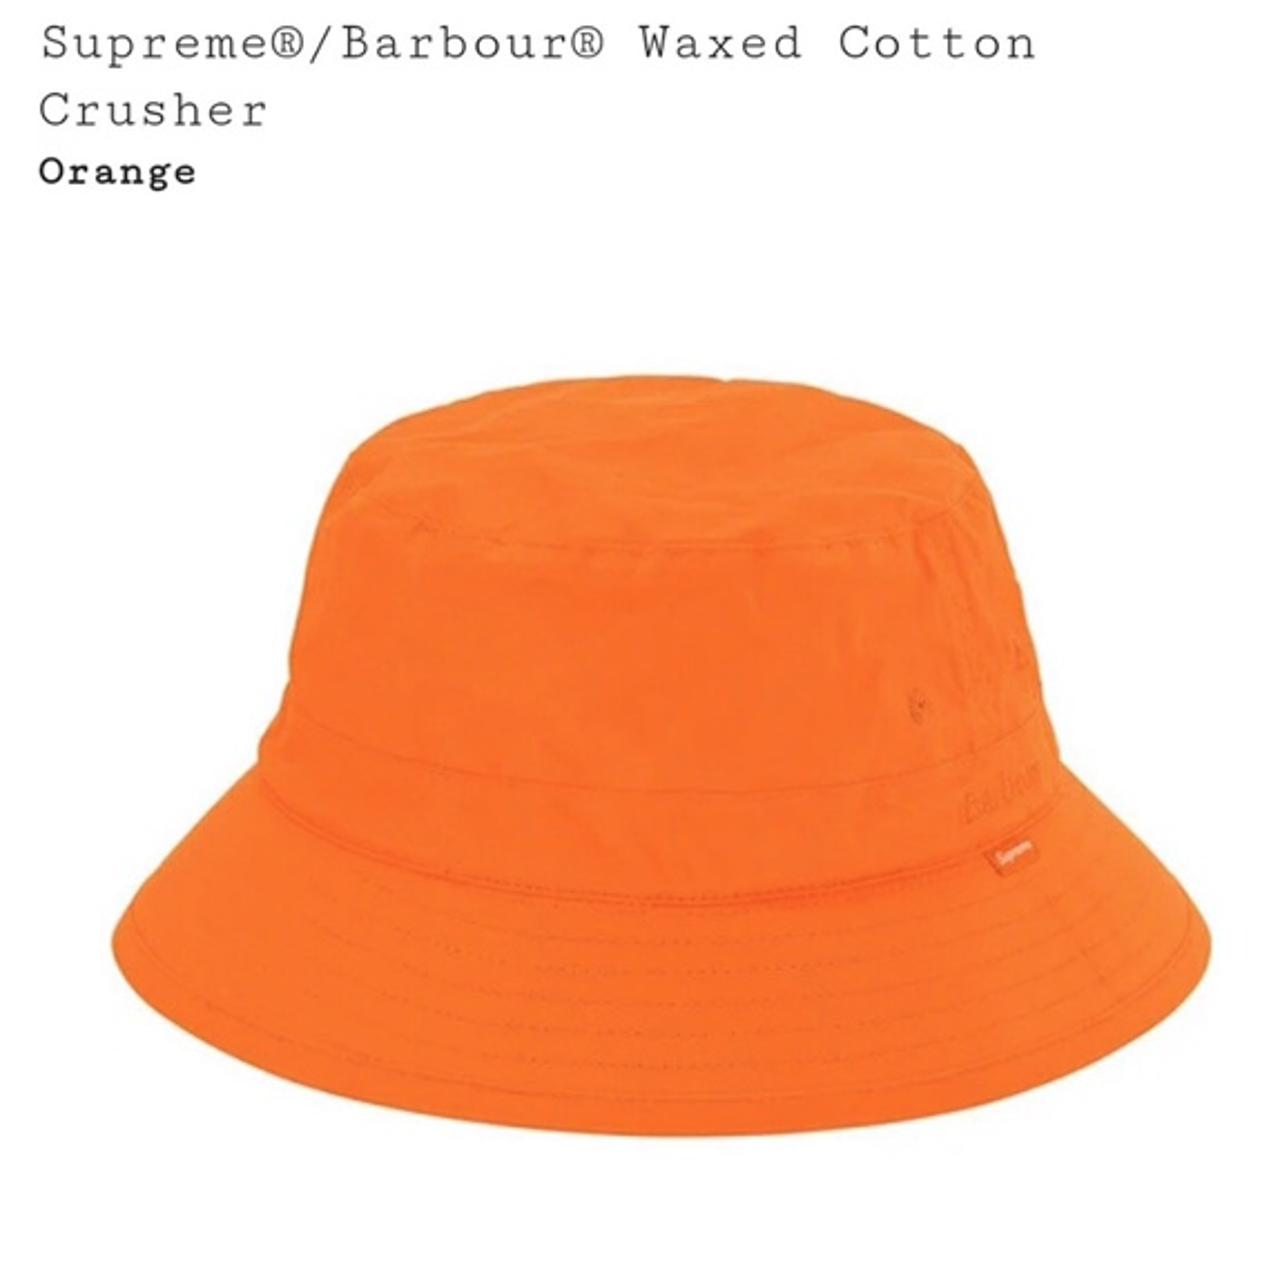 Supreme x Barbour Waxed Cotton Crusher. , Size...